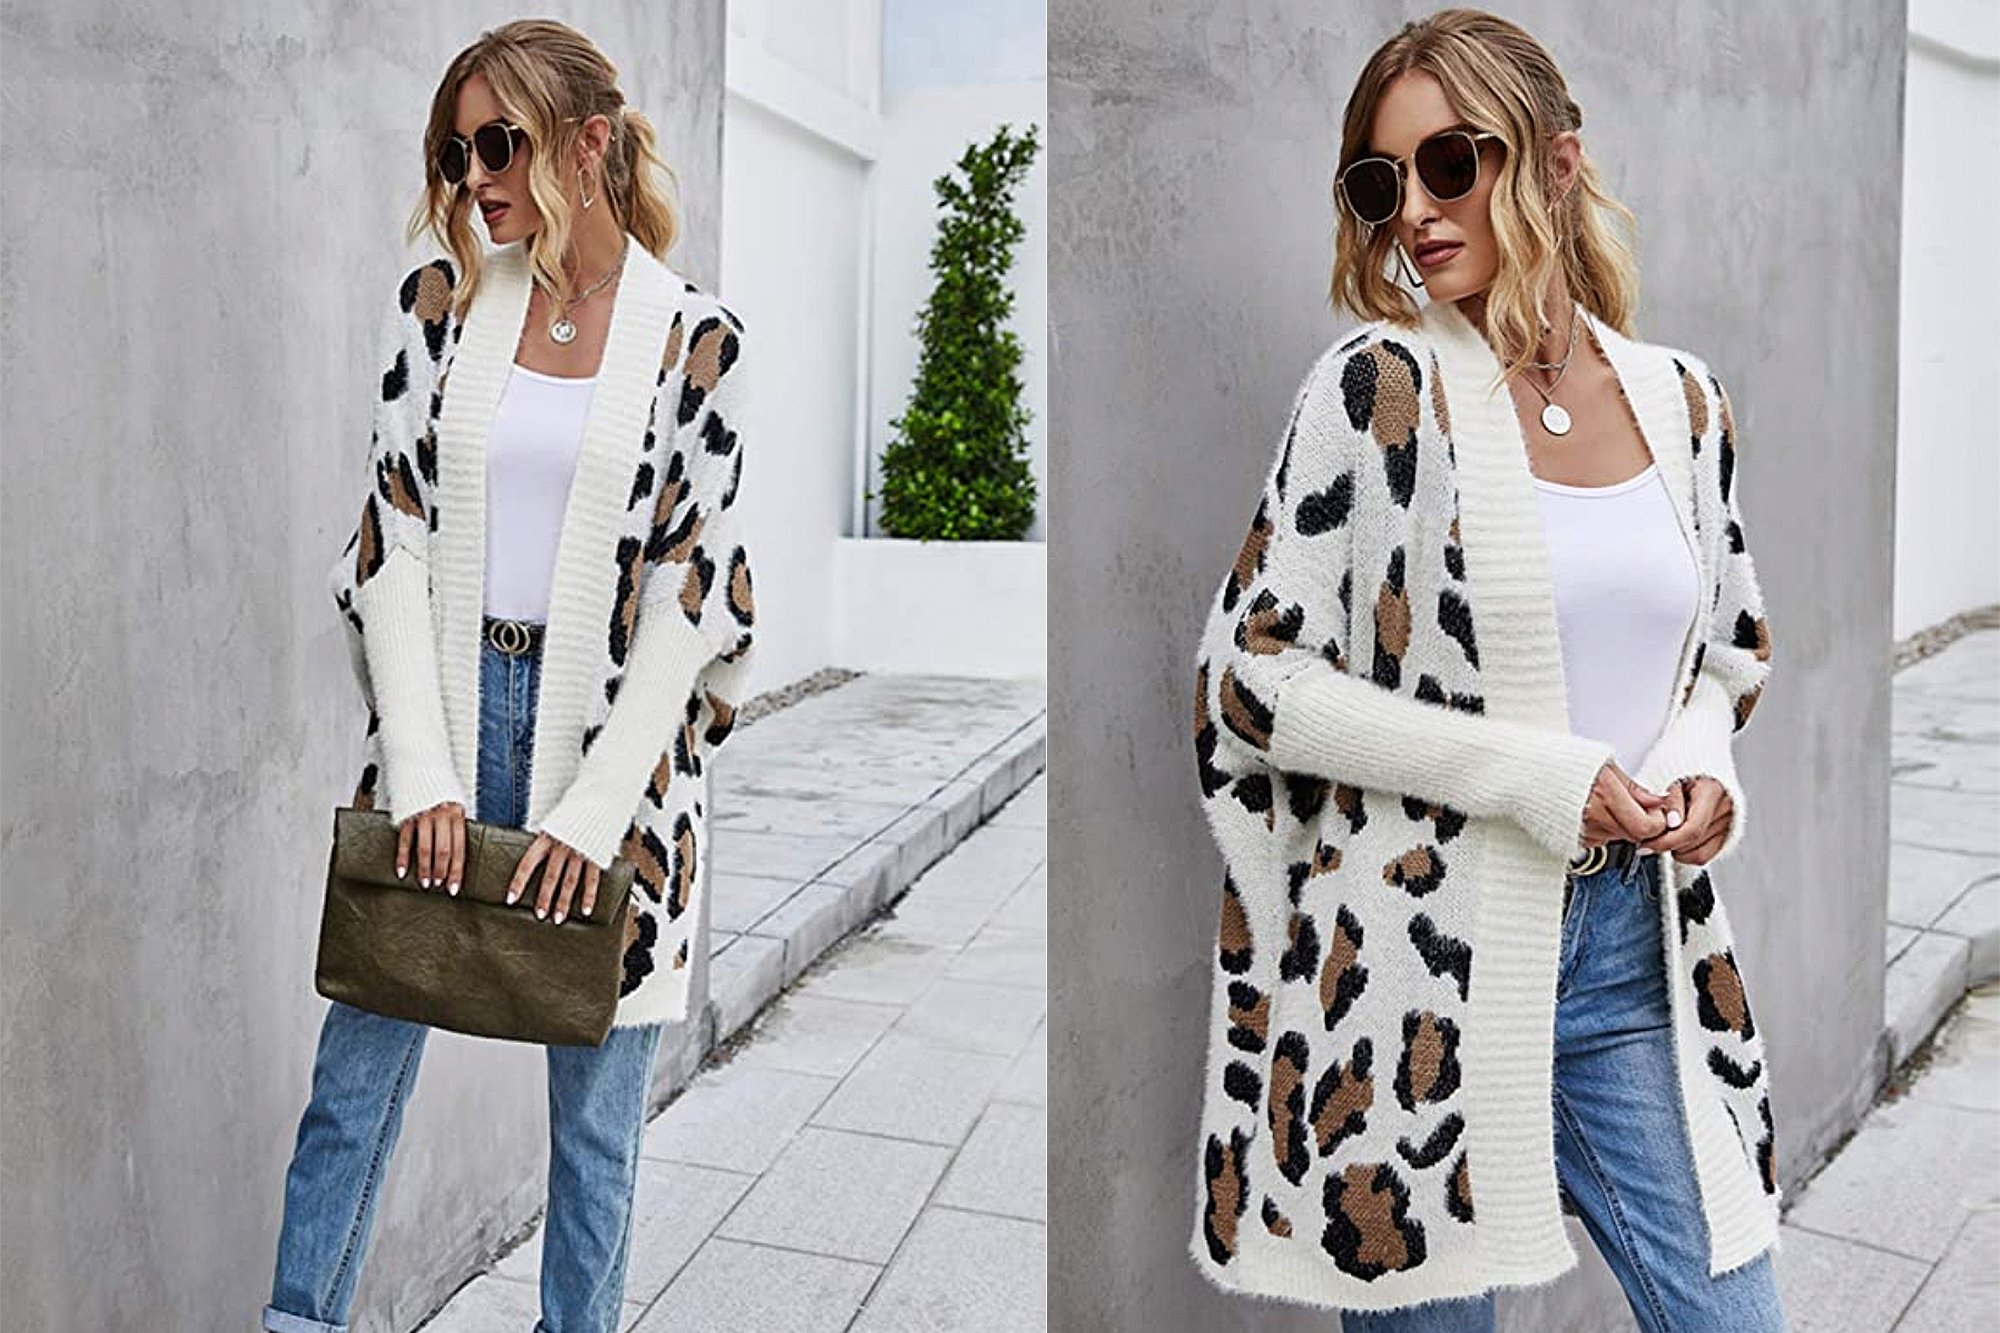 Angashion Leopard Cardigan Will Lead to Constant Compliments